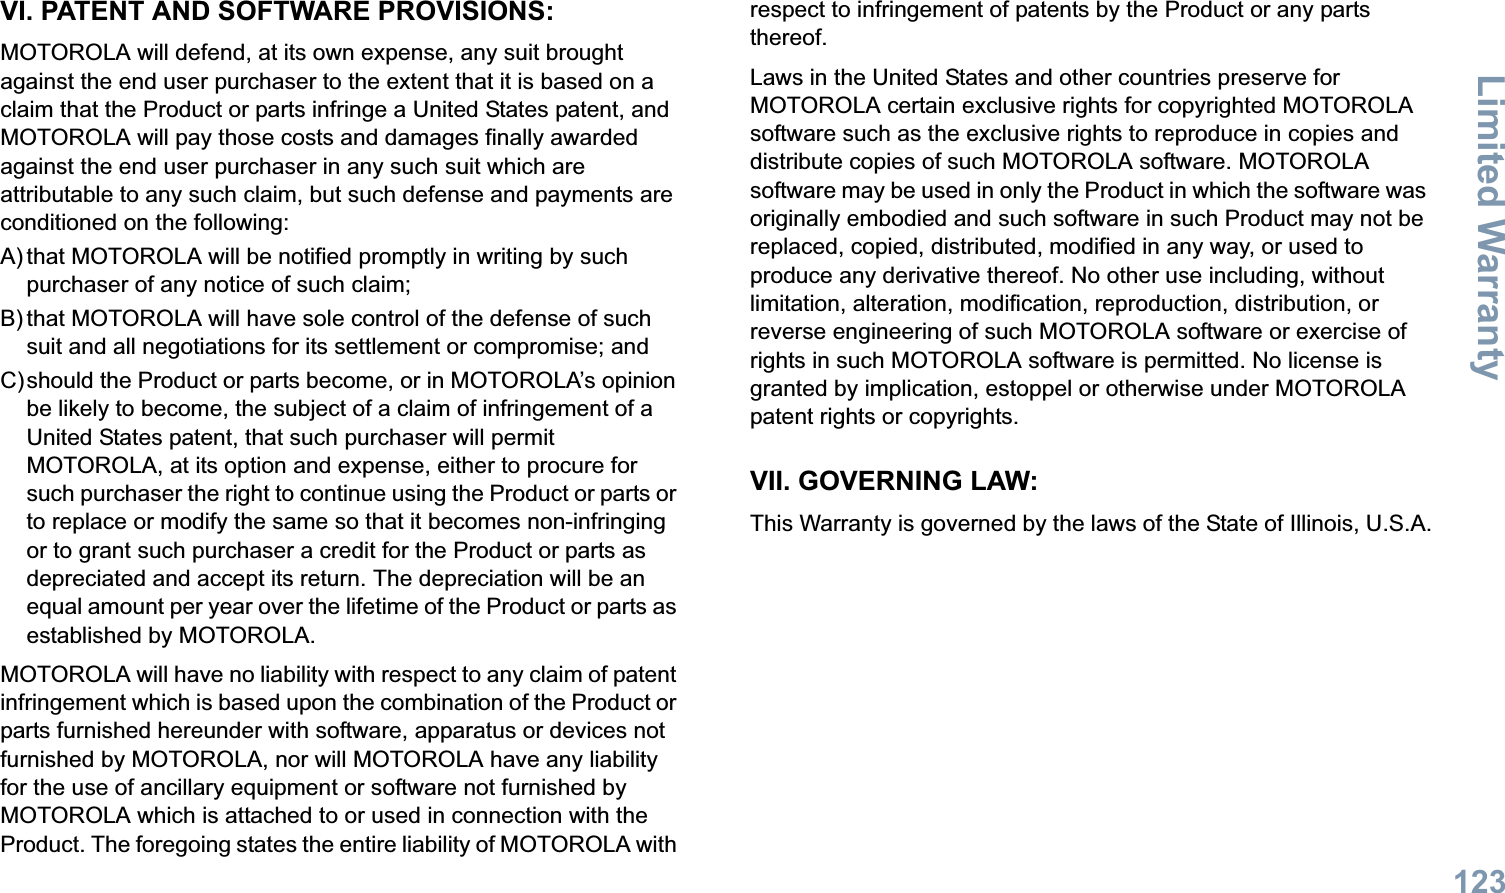 Limited WarrantyEnglish123VI. PATENT AND SOFTWARE PROVISIONS:MOTOROLA will defend, at its own expense, any suit brought against the end user purchaser to the extent that it is based on a claim that the Product or parts infringe a United States patent, and MOTOROLA will pay those costs and damages finally awarded against the end user purchaser in any such suit which are attributable to any such claim, but such defense and payments are conditioned on the following:A) that MOTOROLA will be notified promptly in writing by such purchaser of any notice of such claim;B) that MOTOROLA will have sole control of the defense of such suit and all negotiations for its settlement or compromise; andC)should the Product or parts become, or in MOTOROLA’s opinion be likely to become, the subject of a claim of infringement of a United States patent, that such purchaser will permit MOTOROLA, at its option and expense, either to procure for such purchaser the right to continue using the Product or parts or to replace or modify the same so that it becomes non-infringing or to grant such purchaser a credit for the Product or parts as depreciated and accept its return. The depreciation will be an equal amount per year over the lifetime of the Product or parts as established by MOTOROLA.MOTOROLA will have no liability with respect to any claim of patent infringement which is based upon the combination of the Product or parts furnished hereunder with software, apparatus or devices not furnished by MOTOROLA, nor will MOTOROLA have any liability for the use of ancillary equipment or software not furnished by MOTOROLA which is attached to or used in connection with the Product. The foregoing states the entire liability of MOTOROLA with respect to infringement of patents by the Product or any parts thereof.Laws in the United States and other countries preserve for MOTOROLA certain exclusive rights for copyrighted MOTOROLA software such as the exclusive rights to reproduce in copies and distribute copies of such MOTOROLA software. MOTOROLA software may be used in only the Product in which the software was originally embodied and such software in such Product may not be replaced, copied, distributed, modified in any way, or used to produce any derivative thereof. No other use including, without limitation, alteration, modification, reproduction, distribution, or reverse engineering of such MOTOROLA software or exercise of rights in such MOTOROLA software is permitted. No license is granted by implication, estoppel or otherwise under MOTOROLA patent rights or copyrights.VII. GOVERNING LAW:This Warranty is governed by the laws of the State of Illinois, U.S.A.